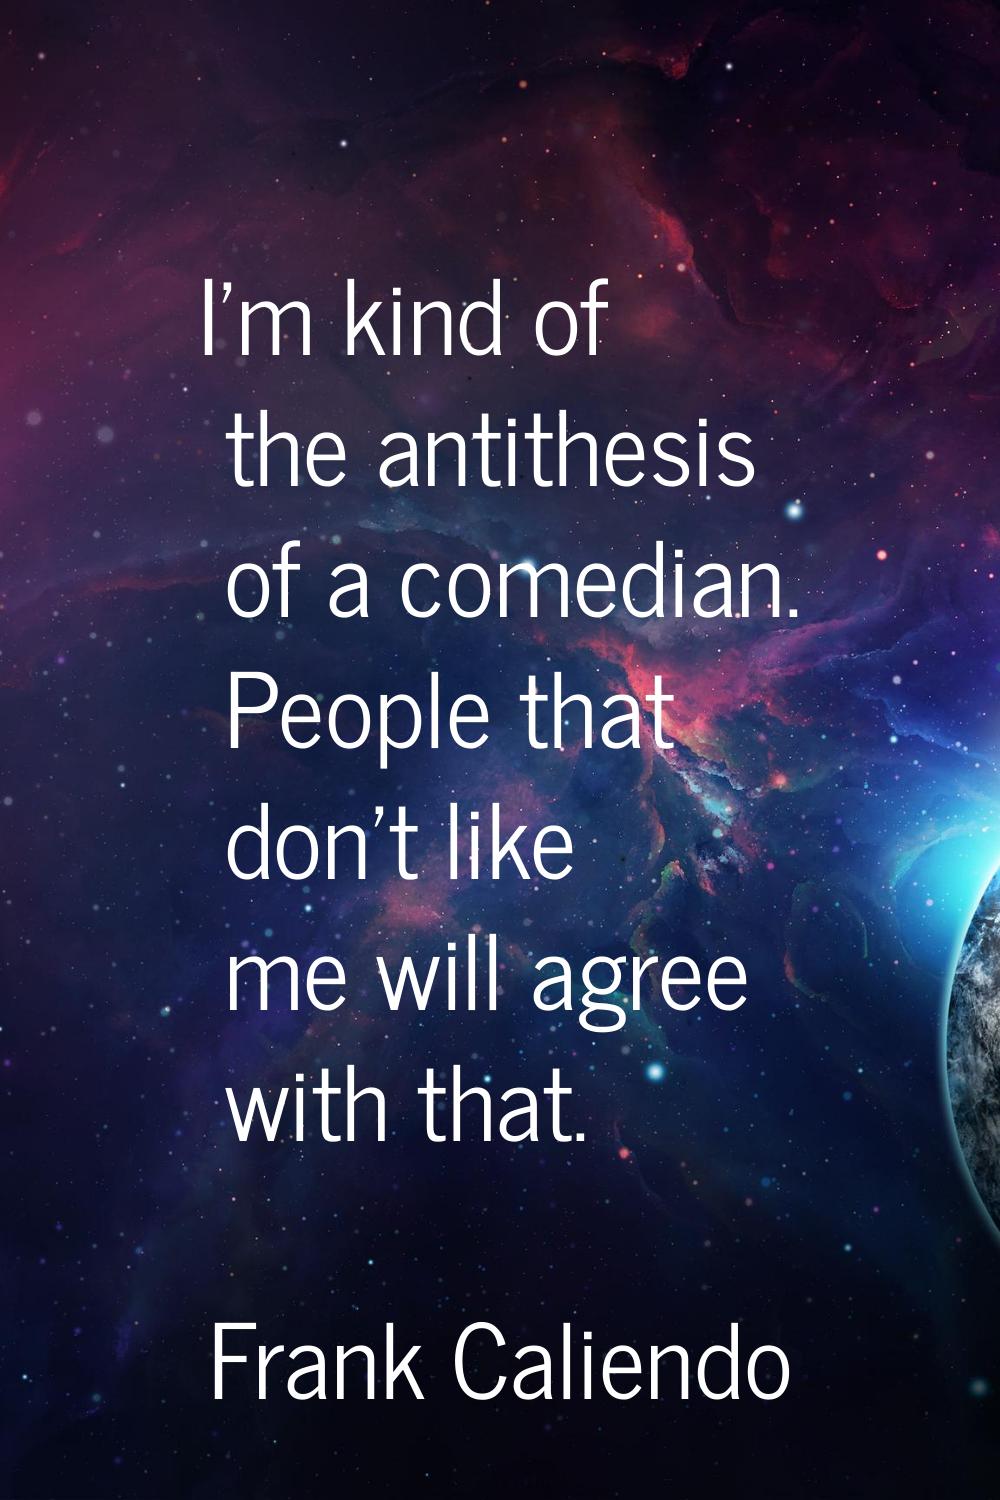 I'm kind of the antithesis of a comedian. People that don't like me will agree with that.